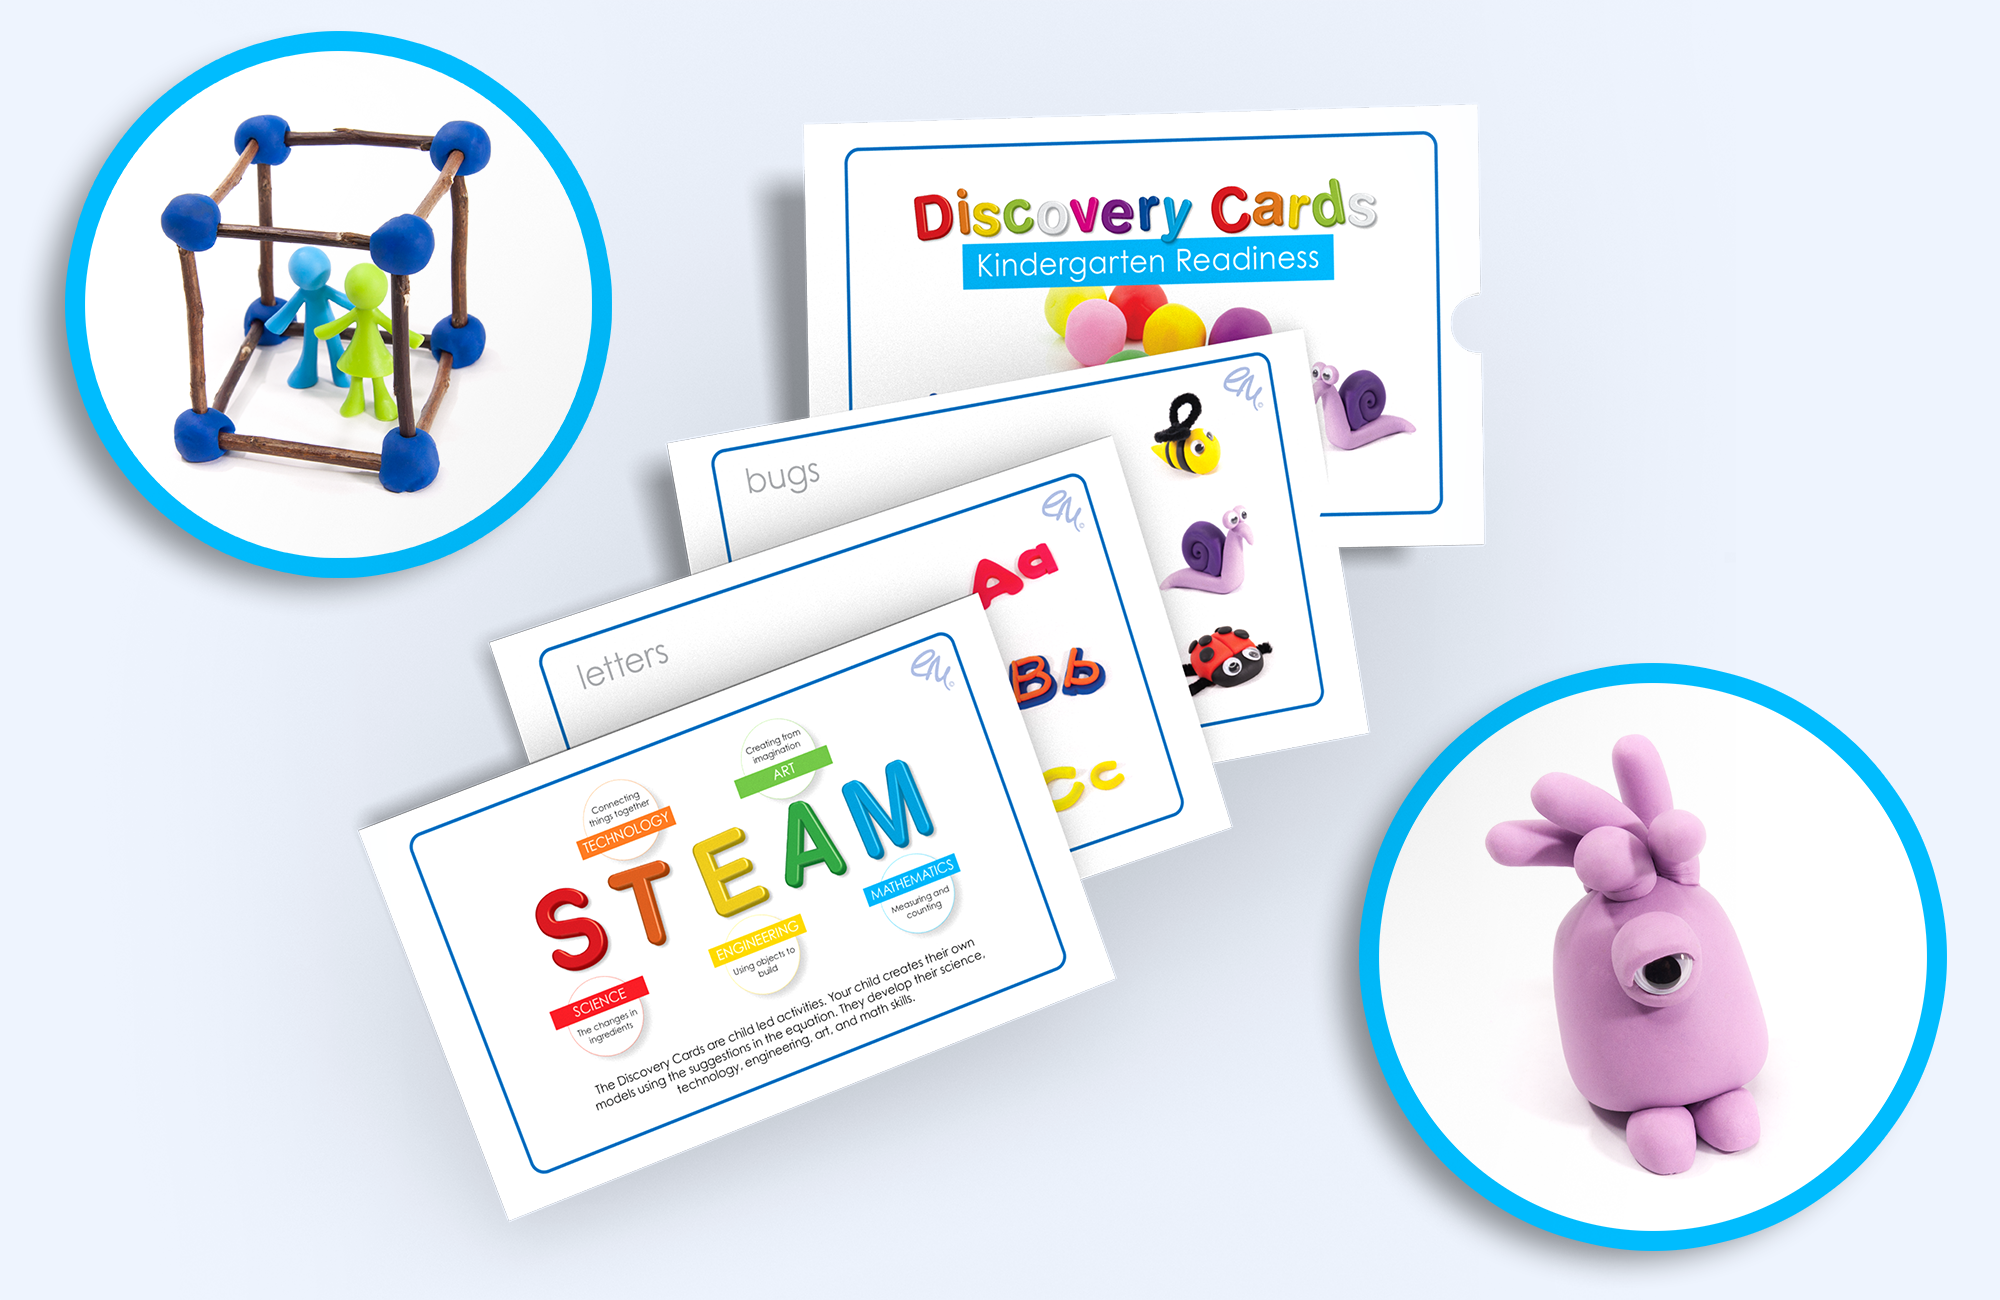 image of Discovery Cards from earlyminds.com